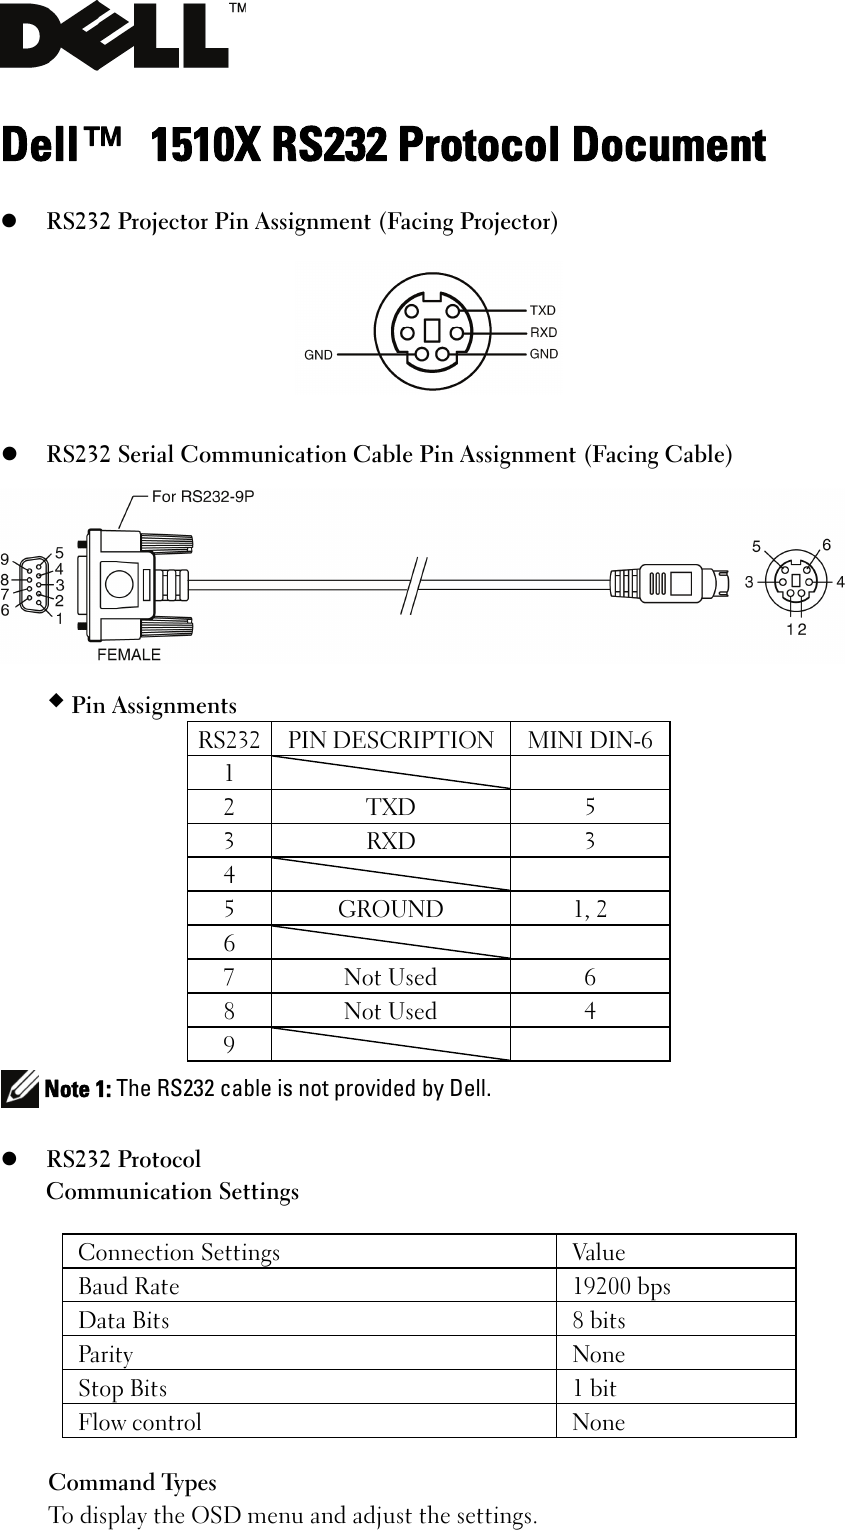 Page 1 of 5 - Dell Dell-1510X-Projector-Quick-Reference-Guide- RS232 Command Line Interface Guide  Dell-1510x-projector-quick-reference-guide